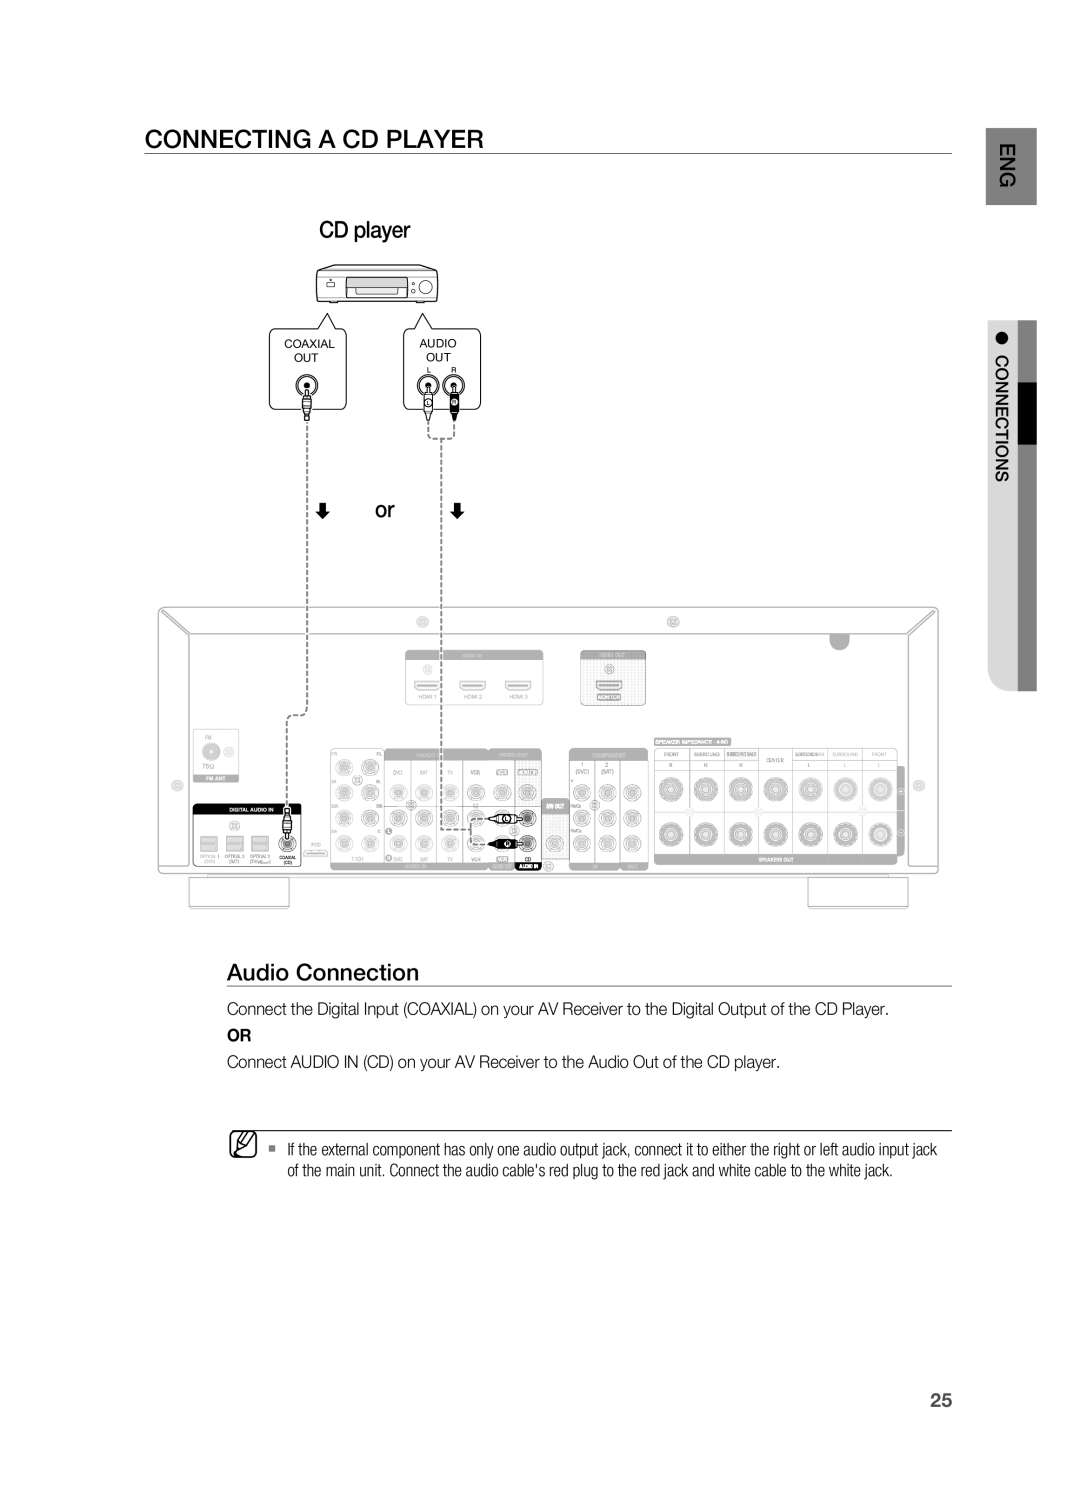 Samsung HT-AS730S user manual Connecting a CD player, Audio Connection 